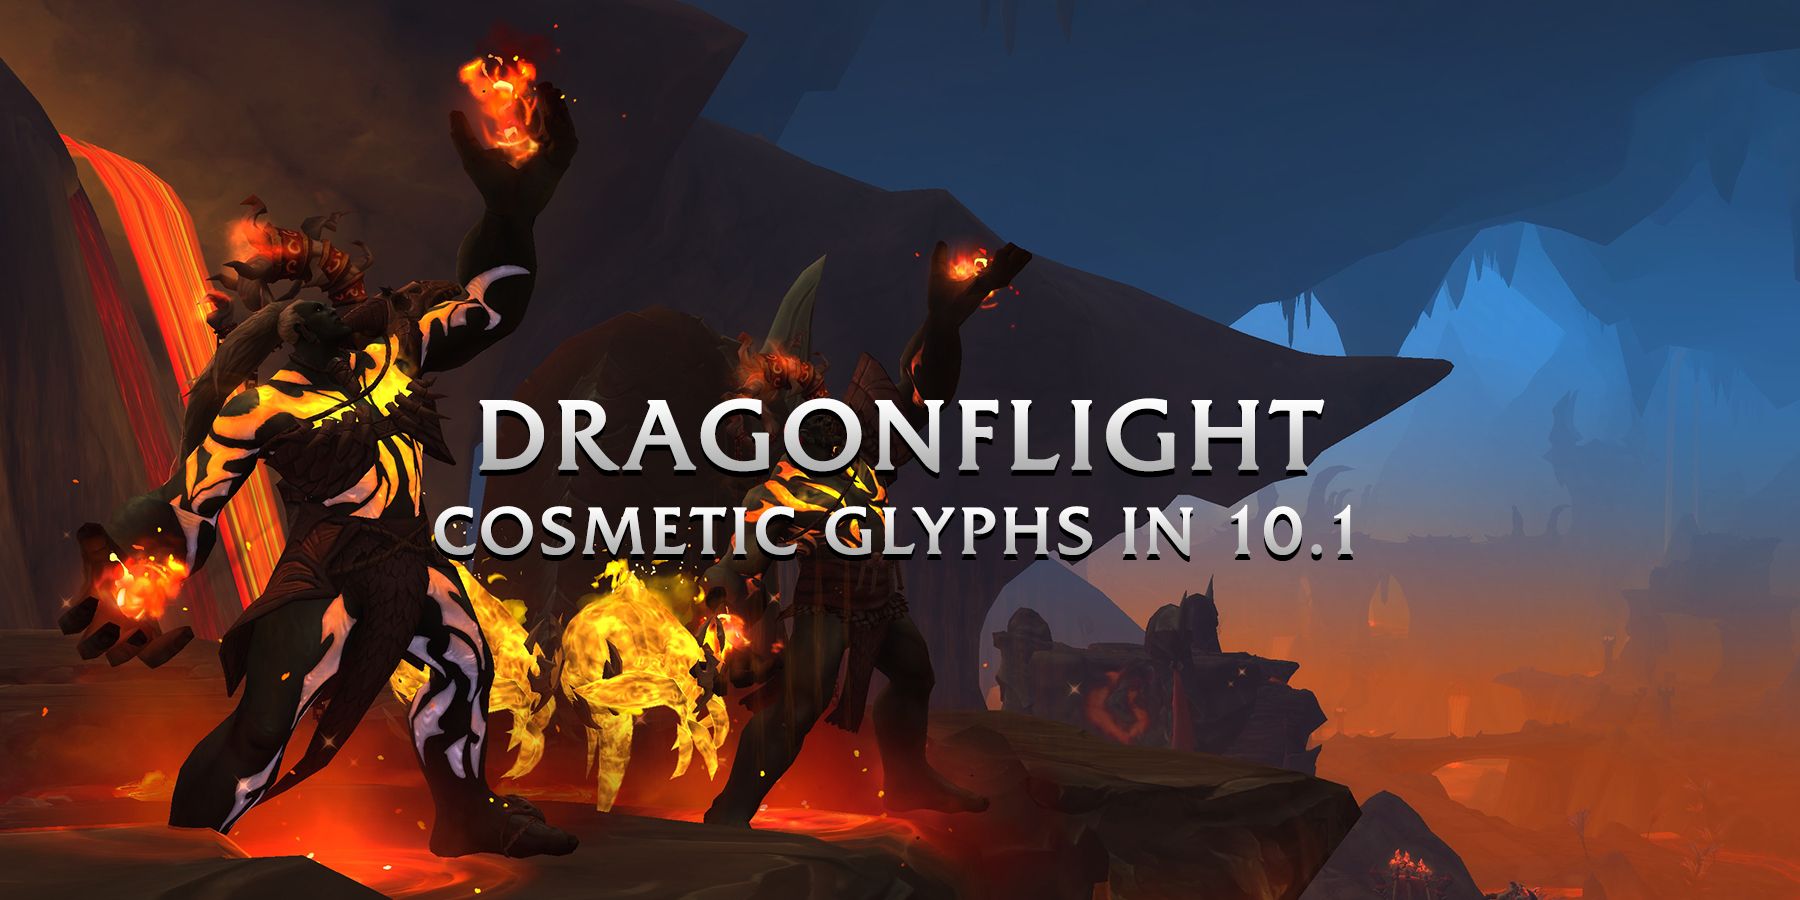 wow world of warcraft dragonflight cosmetic glyphs embers of neltharion 10.1 demon hunter throw glaive